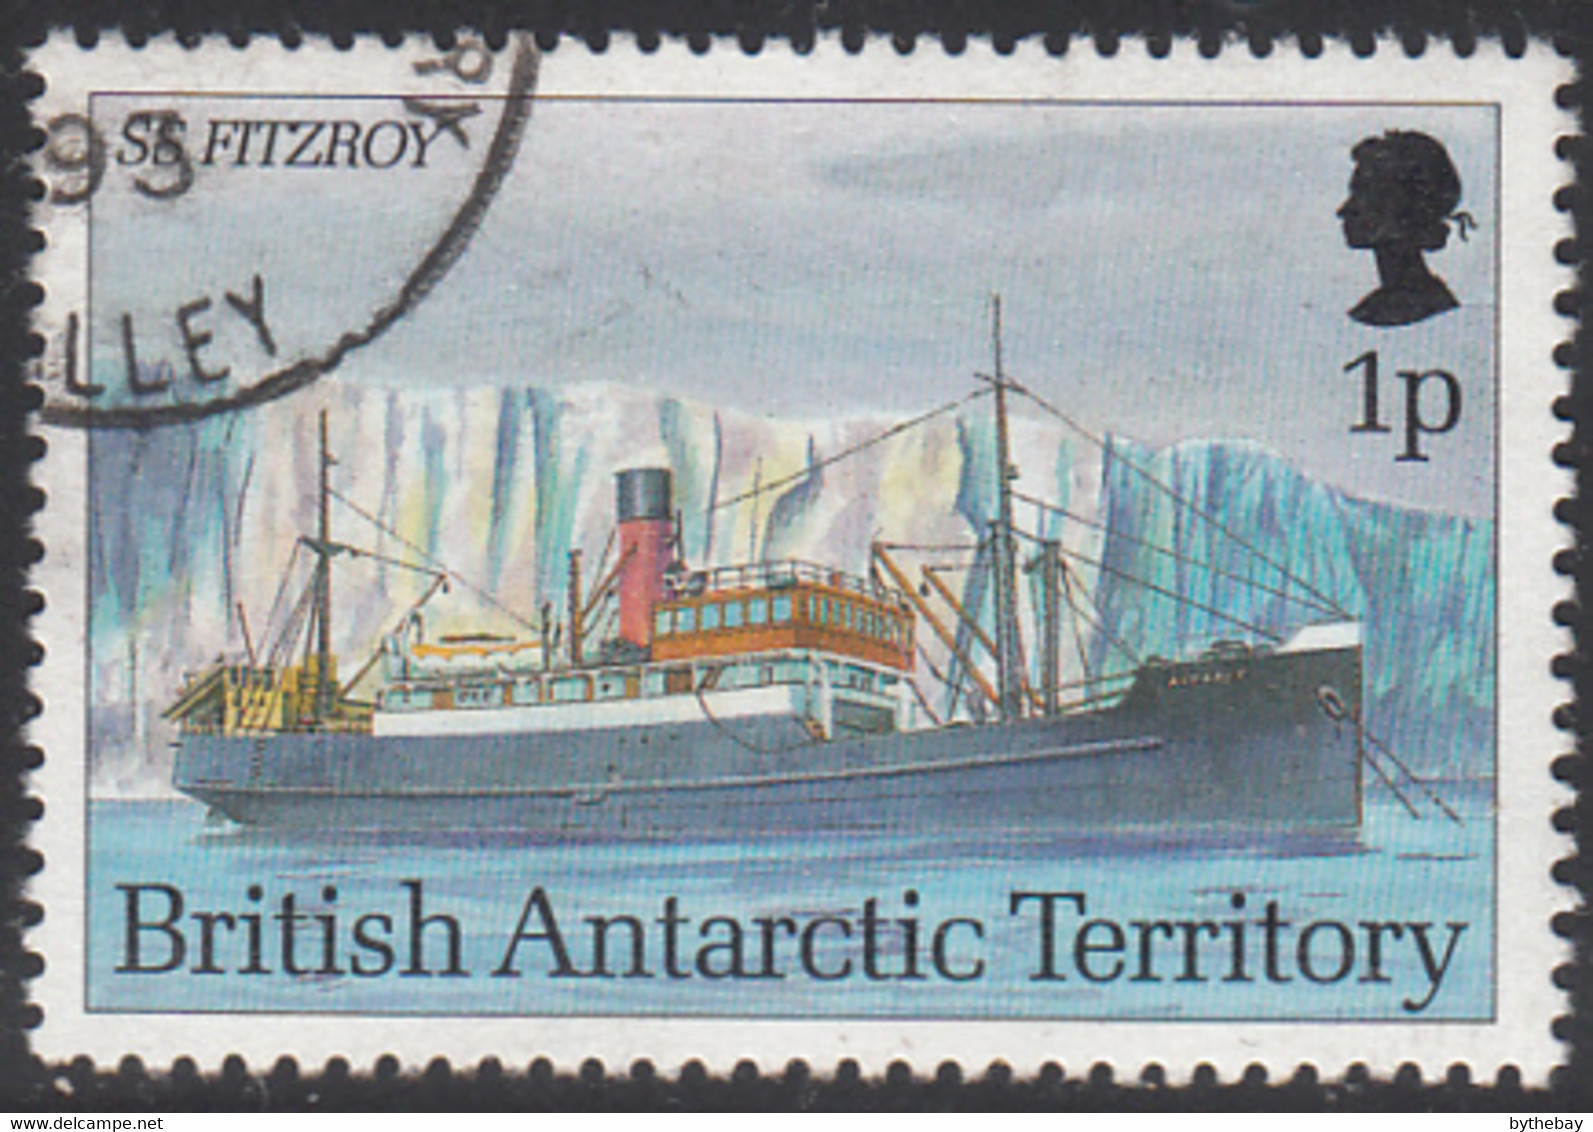 British Antarctic Territory 1993 Used Sc #202 1p SS Fitzroy Research Ships - Oblitérés